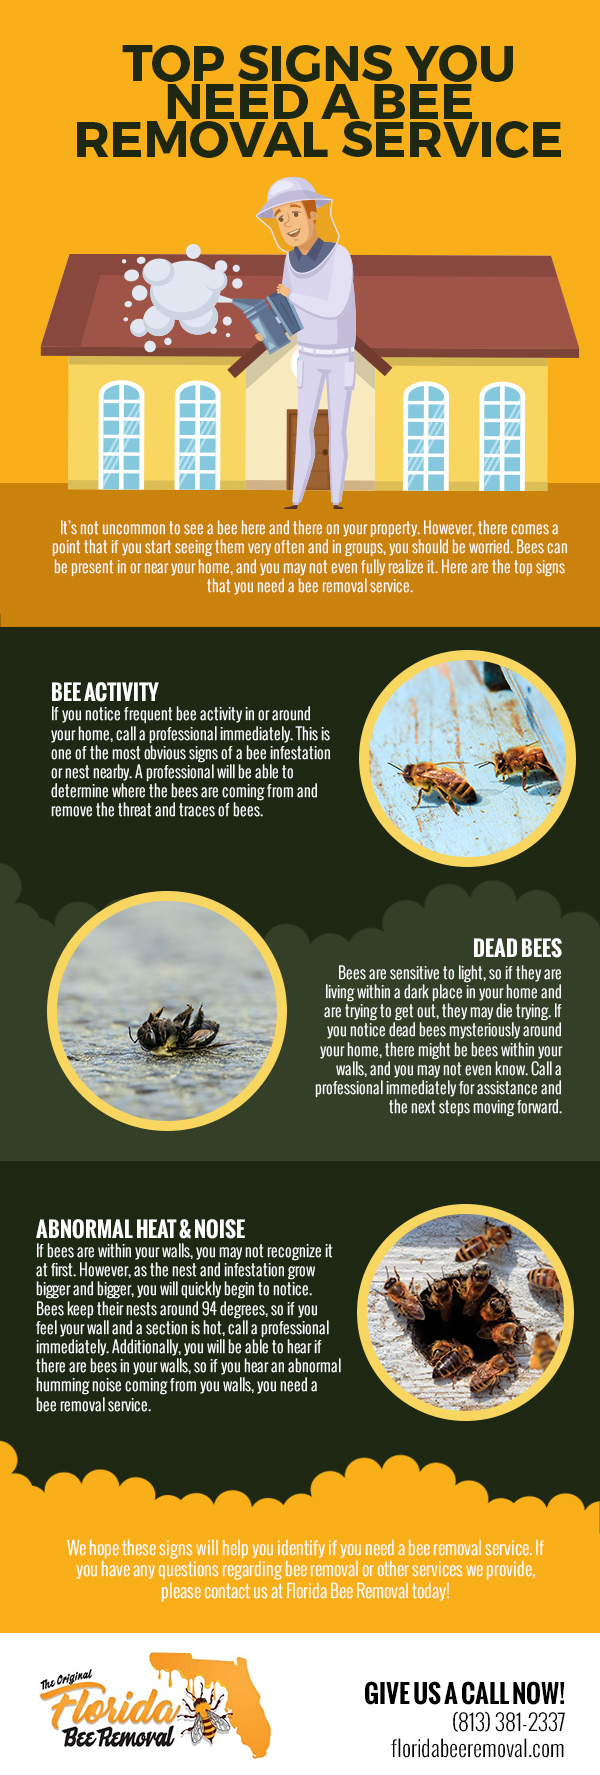 Top Signs You Need a Bee Removal Service [infographic]